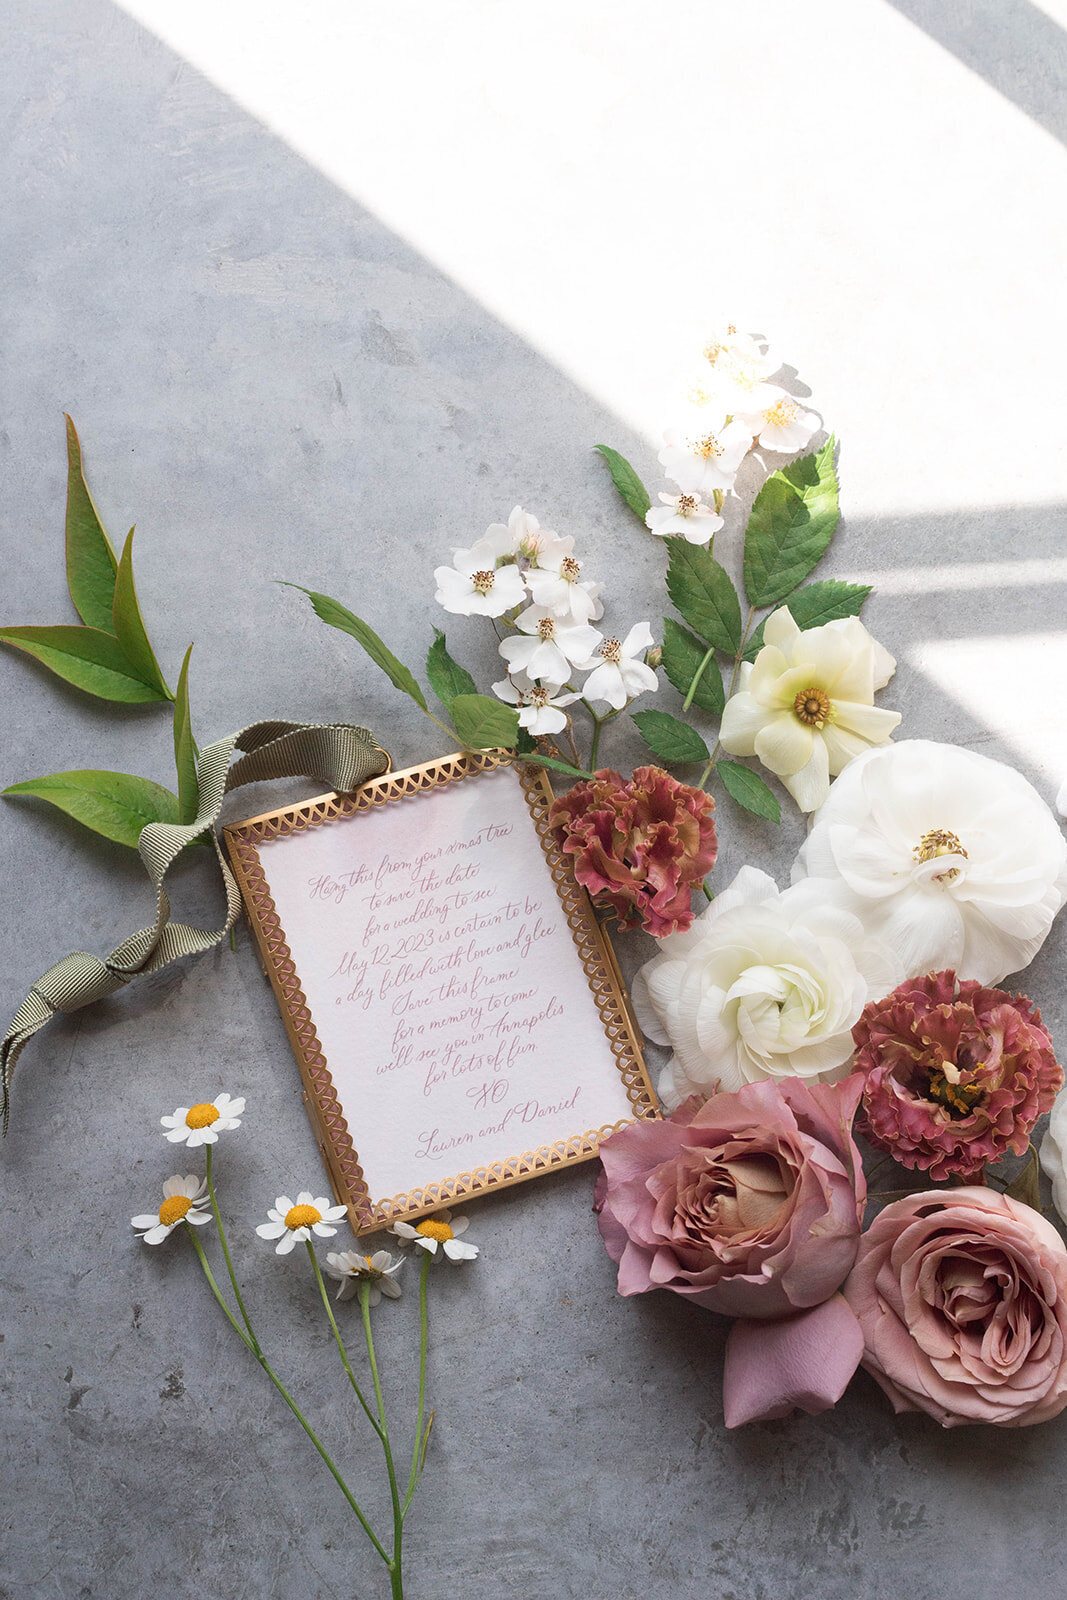 Flat lay photograph of wedding details including floral accents such as white ranunculus, daisies, lisianthus, and mauve garden rose.